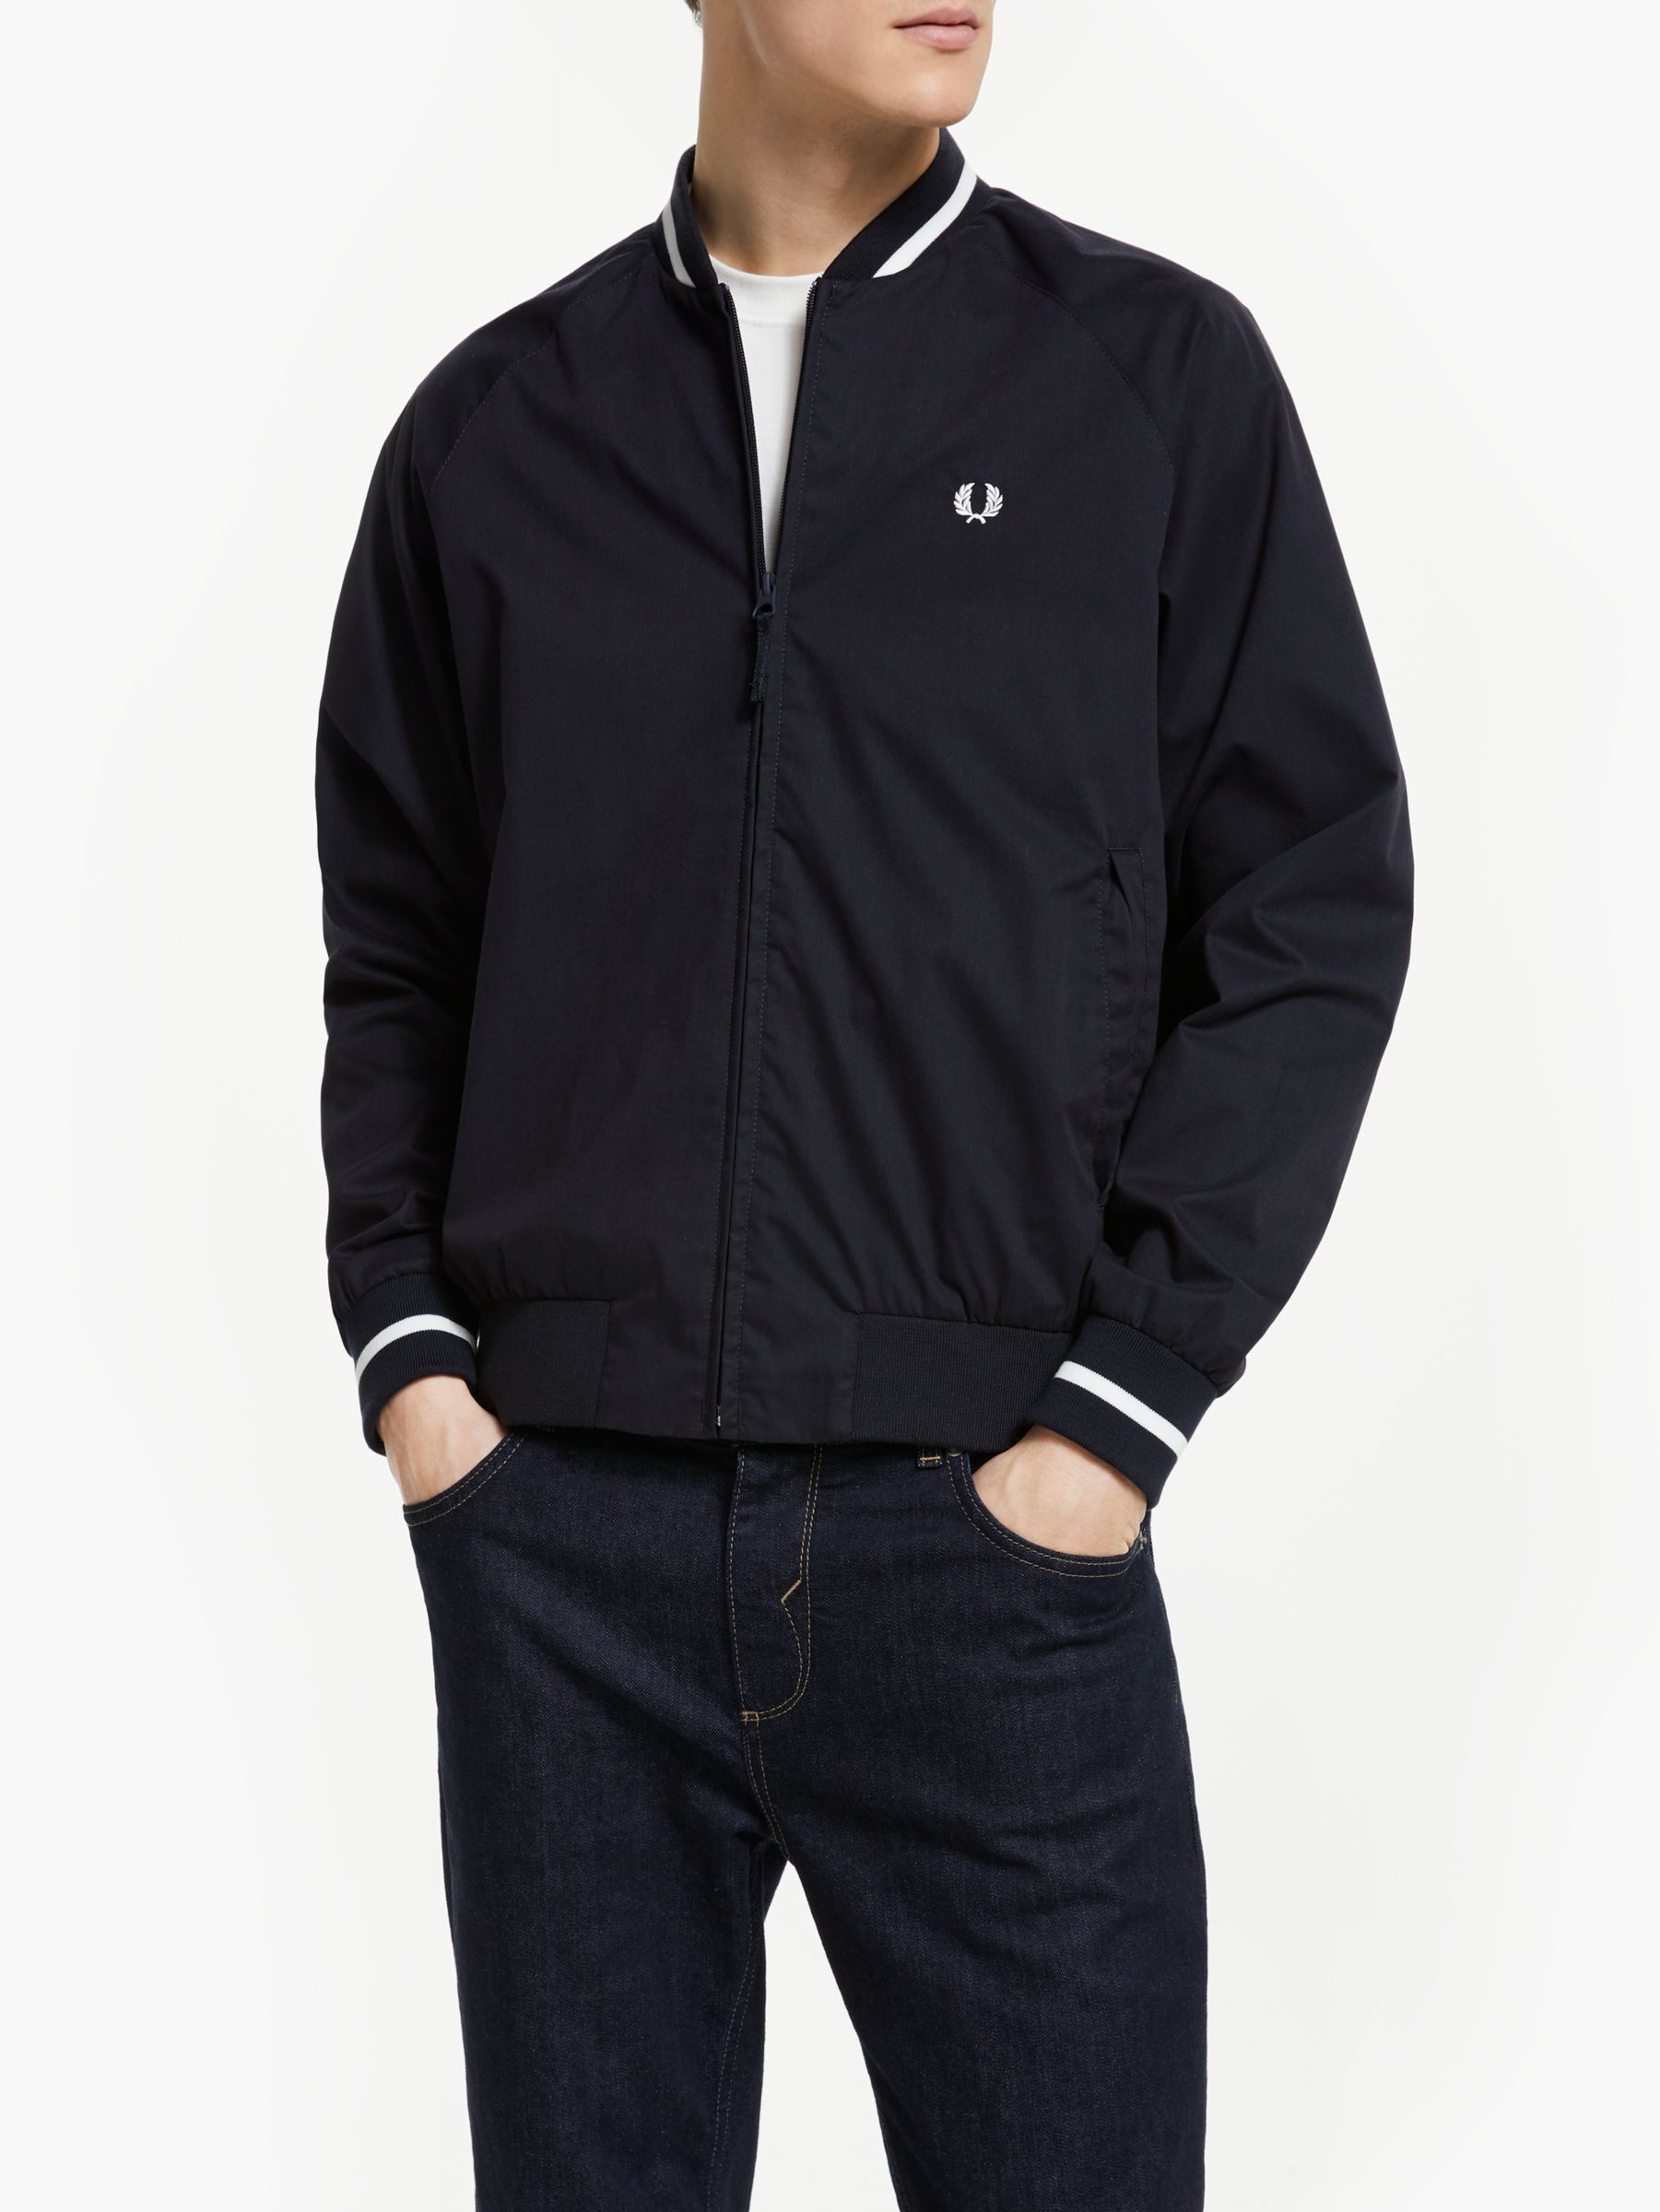 Fred Perry Tennis Bomber Jacket, Navy at John Lewis & Partners